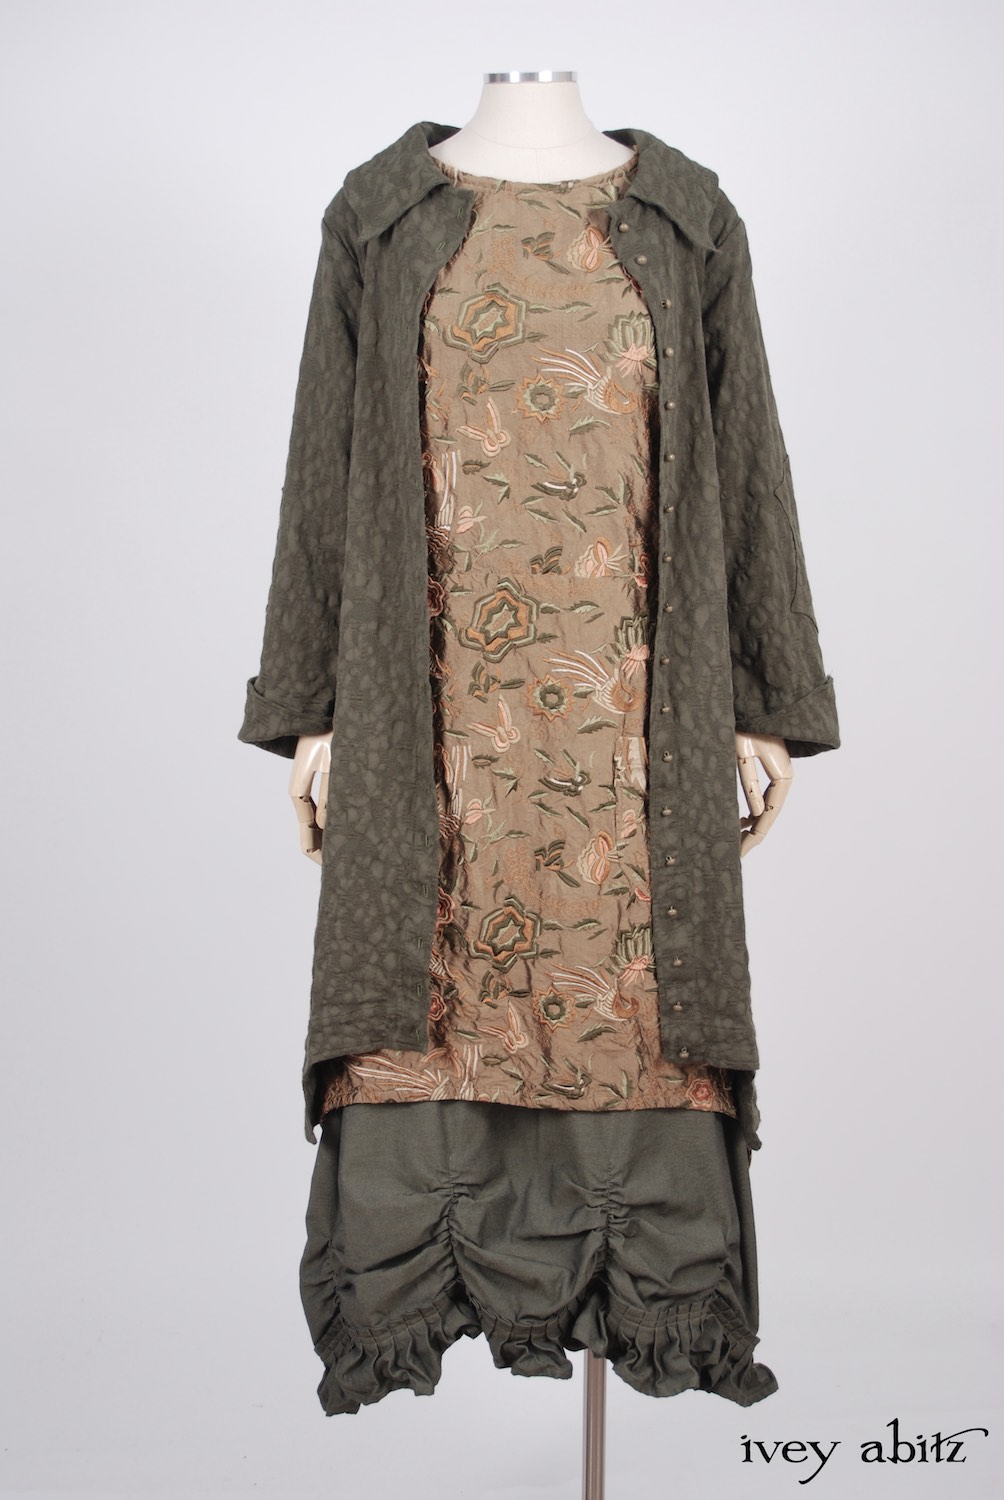 Ivey Abitz - Chittister Duster Coat in Morning Meadow Hemstitch Jacquard  - Dennison Frock in Birdsong Embroidered Silk  - Edenshire Frock in Morning Meadow Yarn Dyed Cotton, Low Water Length